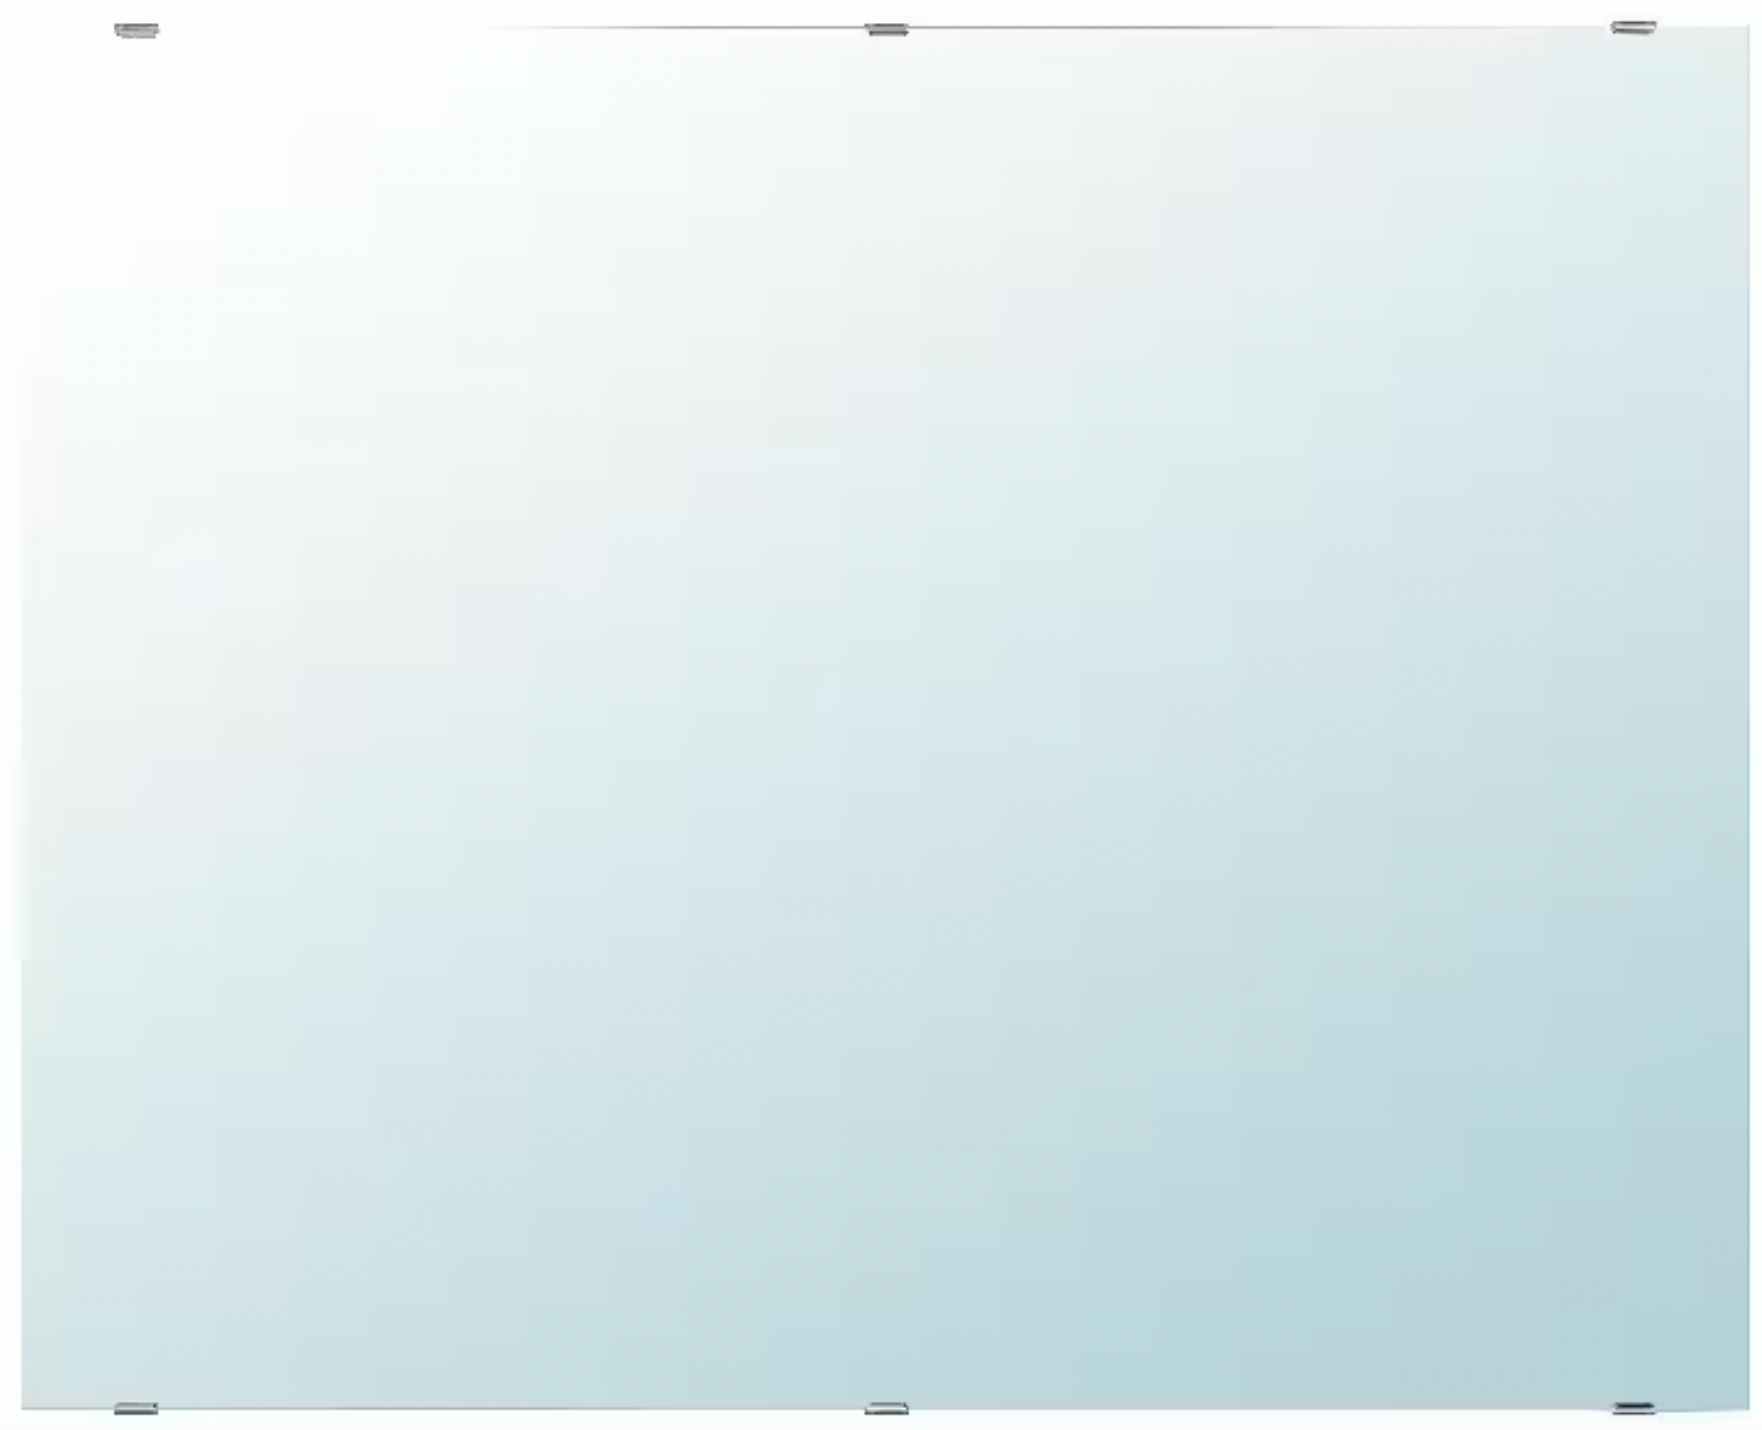 Official product image of the IKEA LETTAN mirror, which has been recalled due to a laceration hazard.